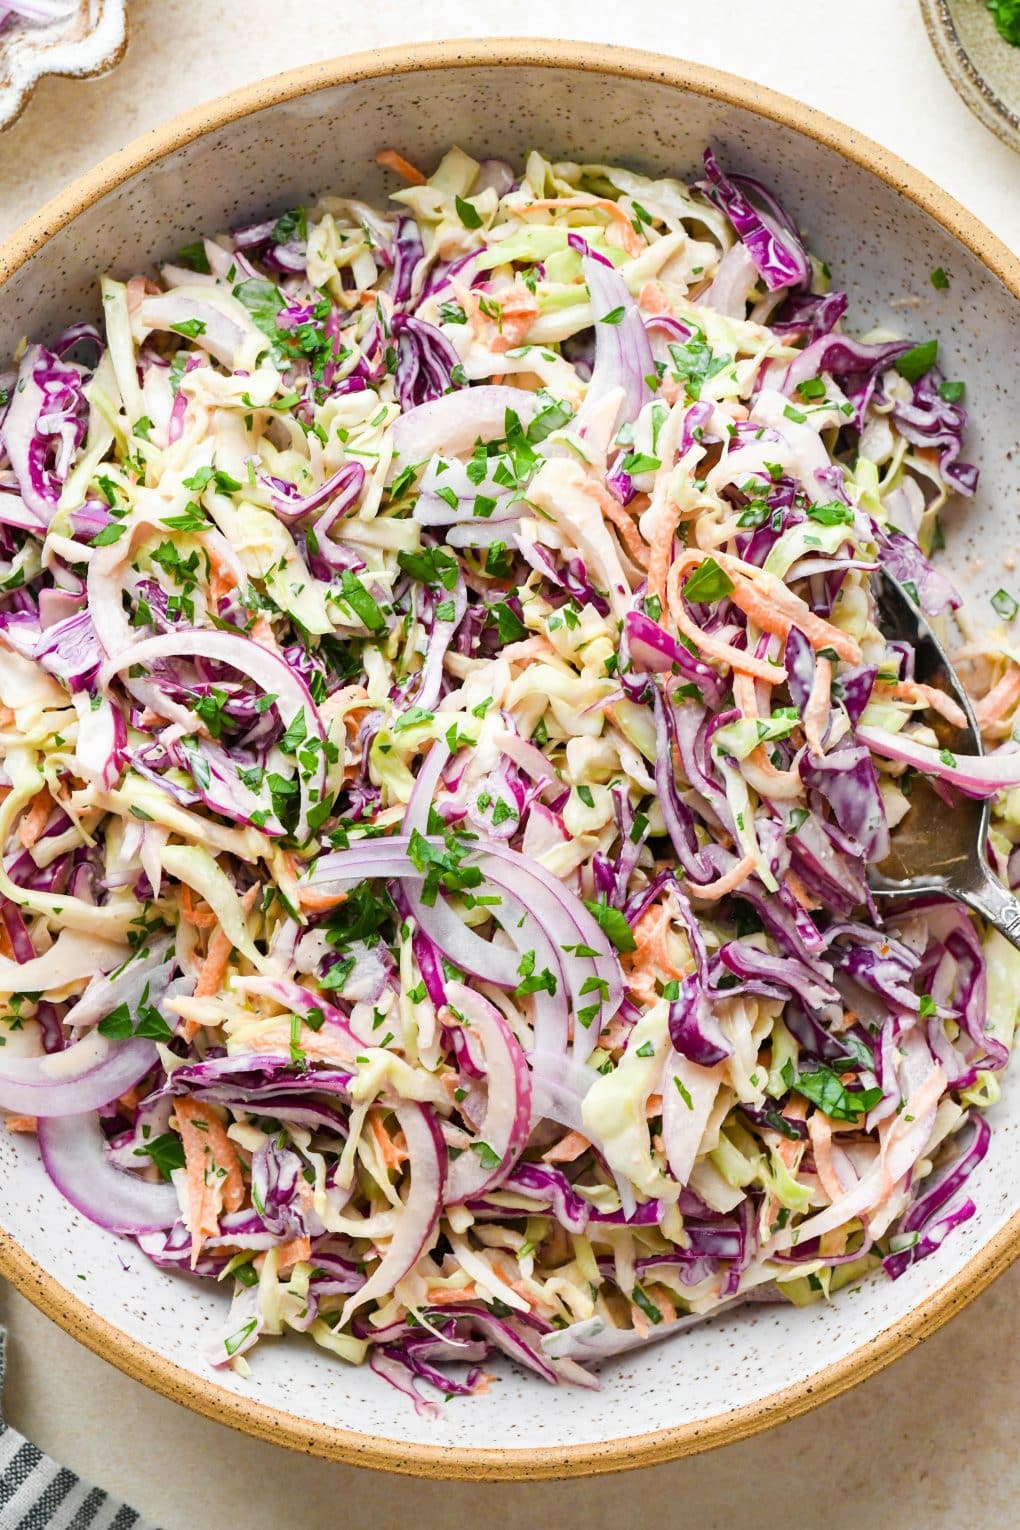 A close up shot of a large serving spoon digging into a bowl of Whole30 coleslaw.